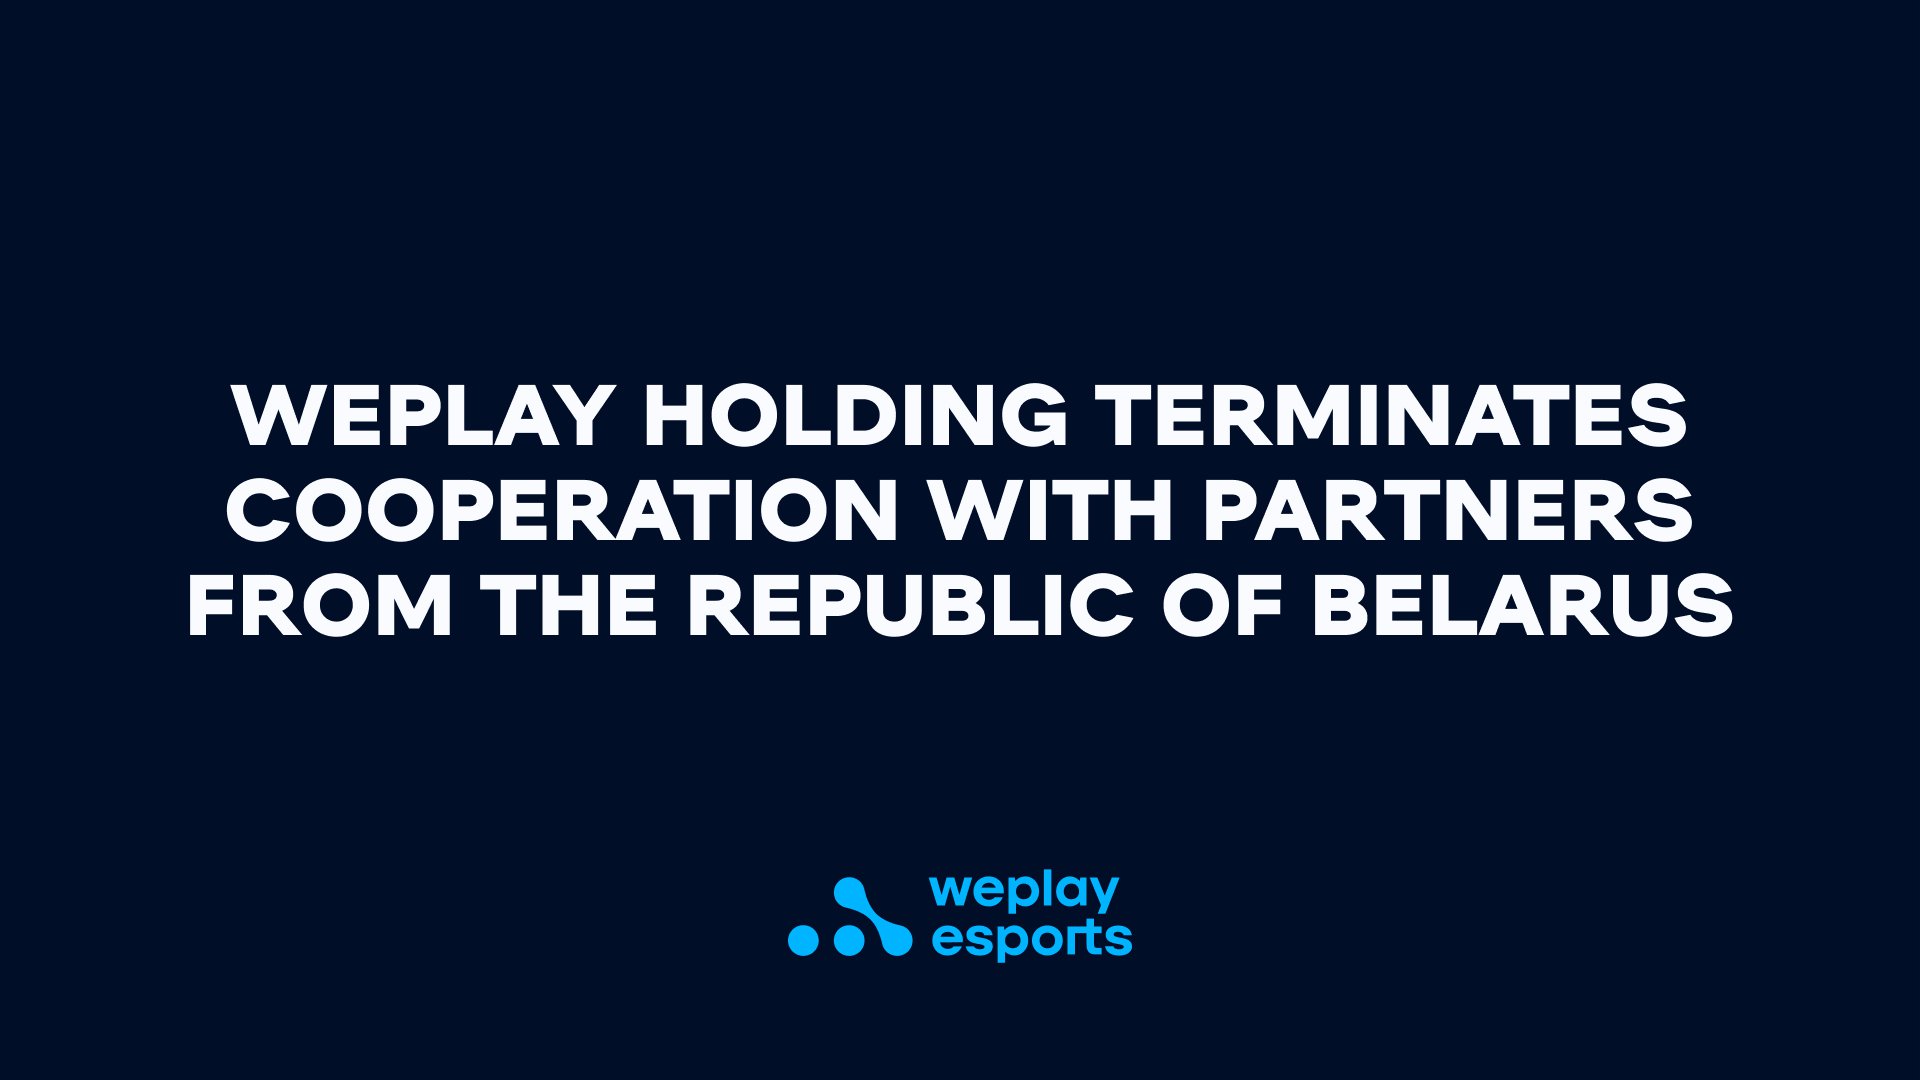 WePlay Holding terminates cooperation with partners from the Republic of Belarus. Visual: WePlay Holding